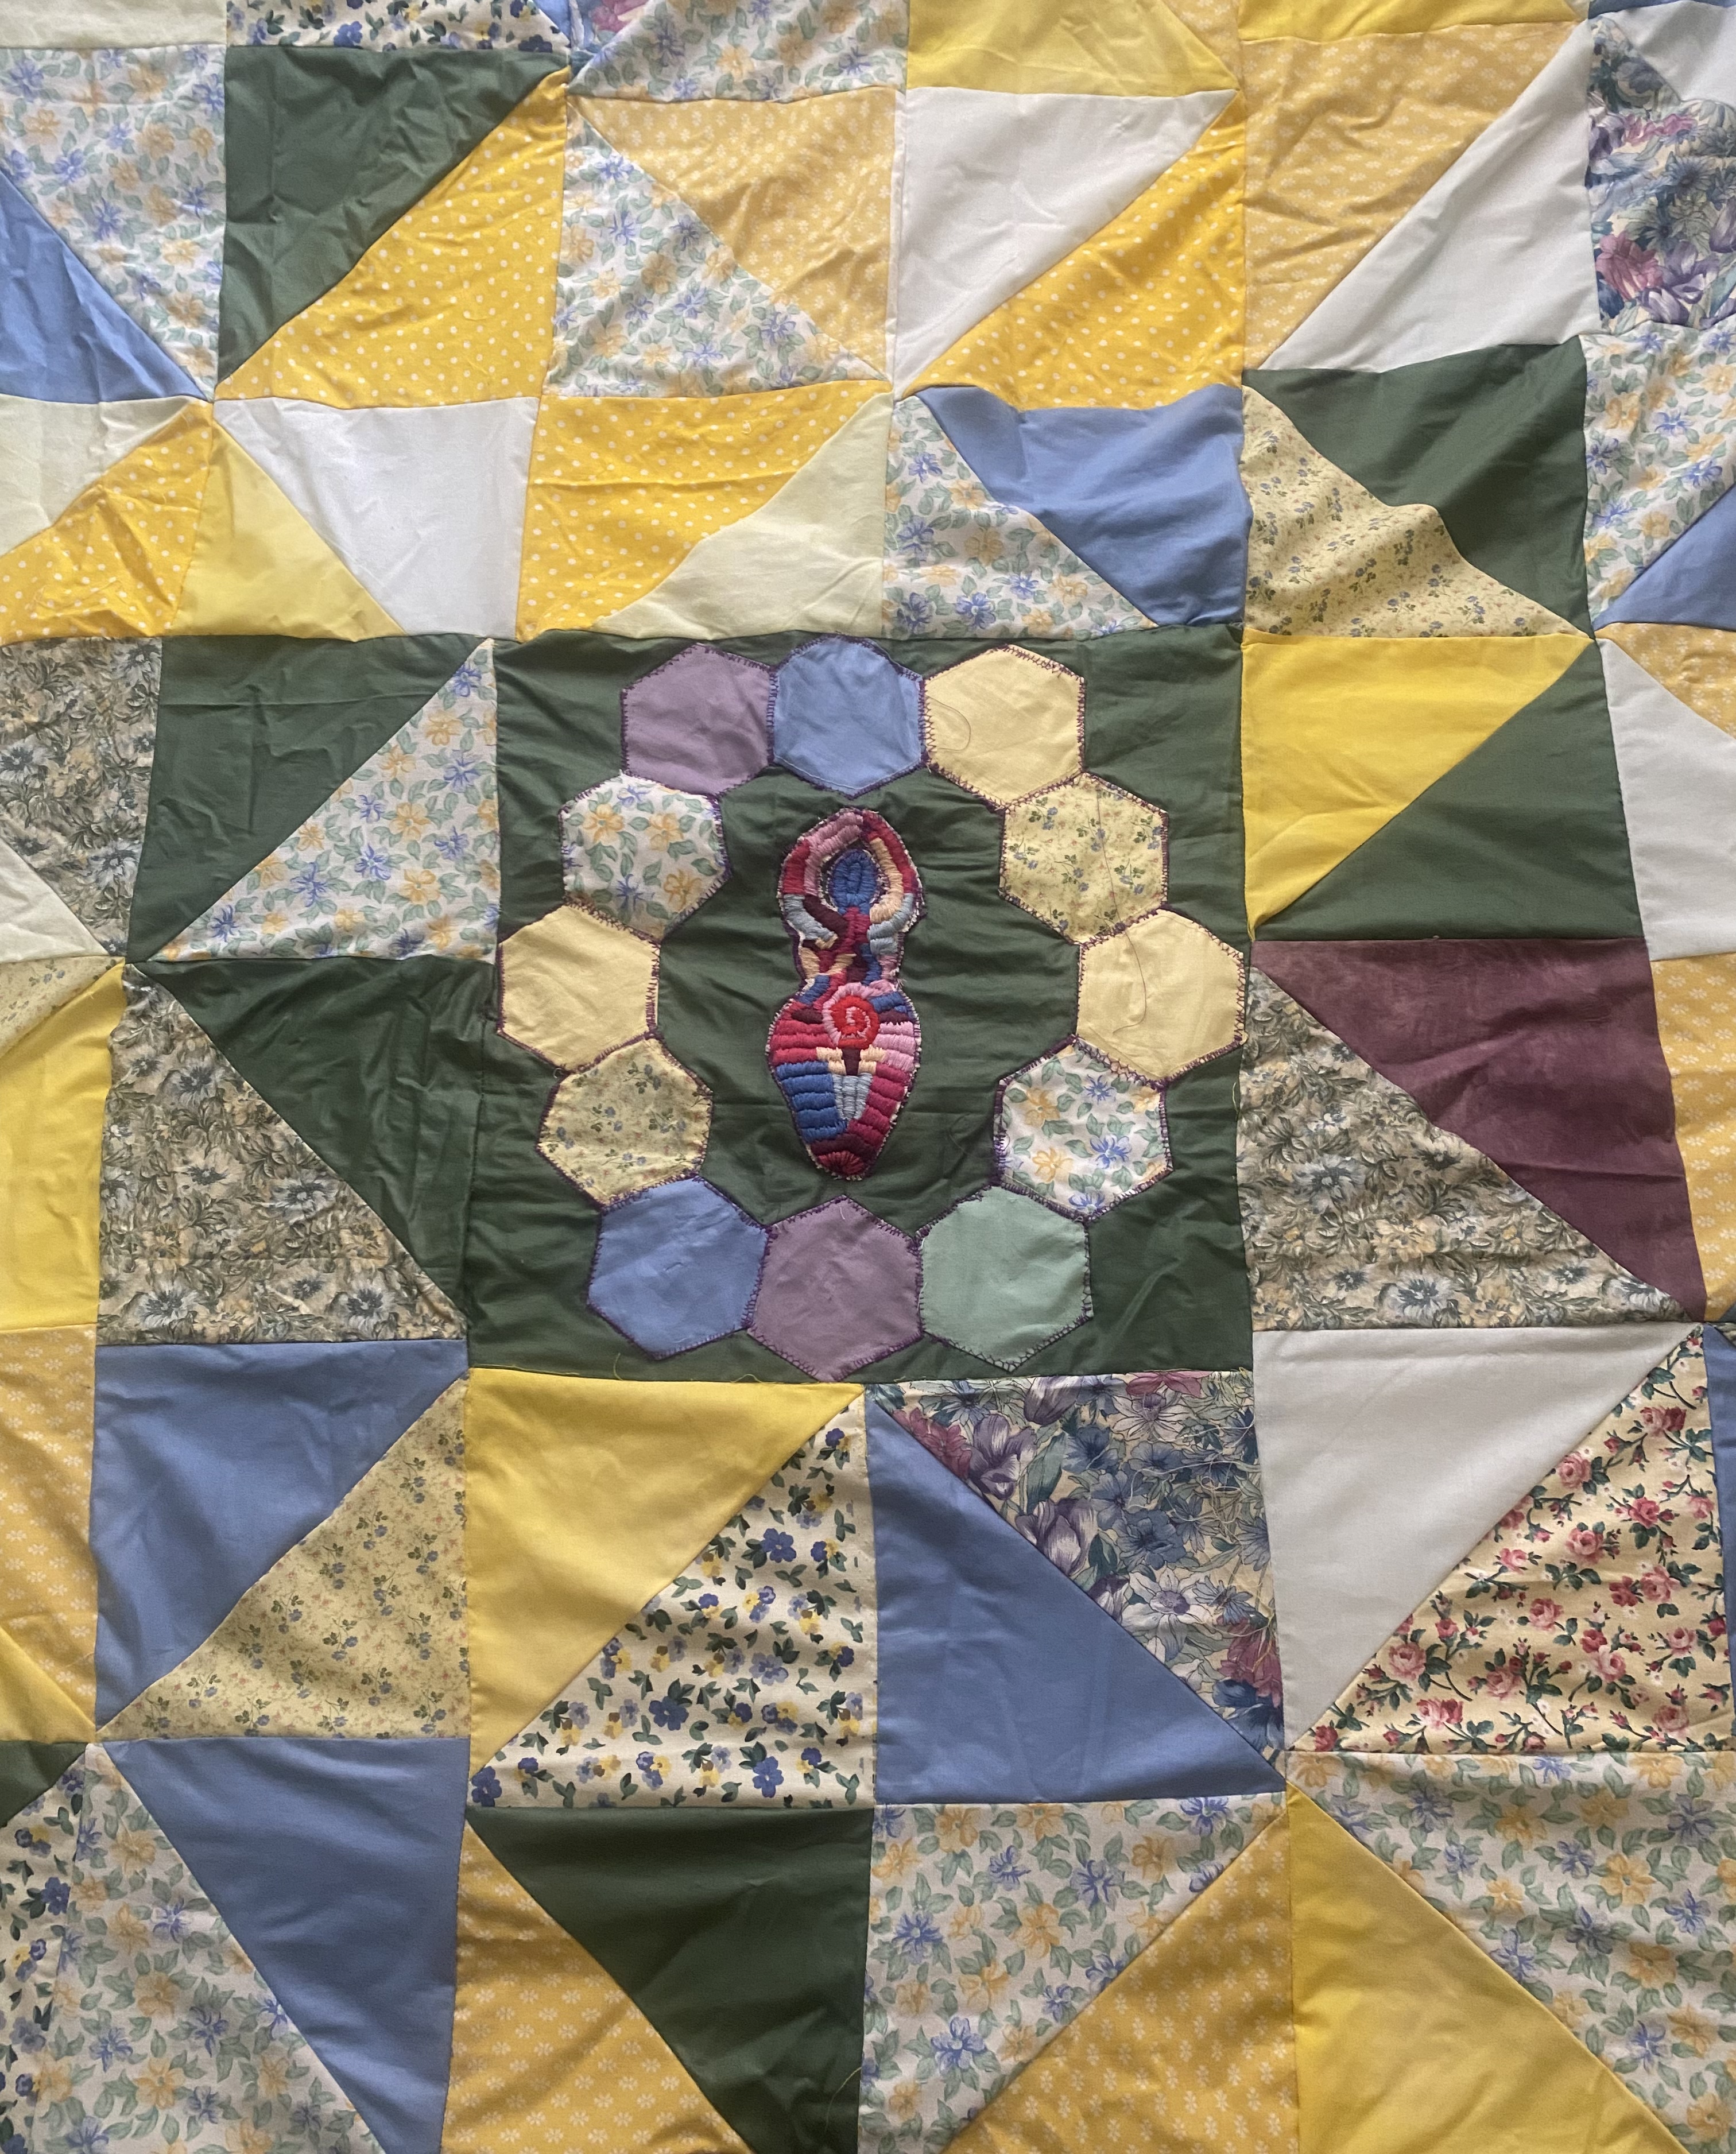 Goddess quilt, embroidery and recycled textiles 